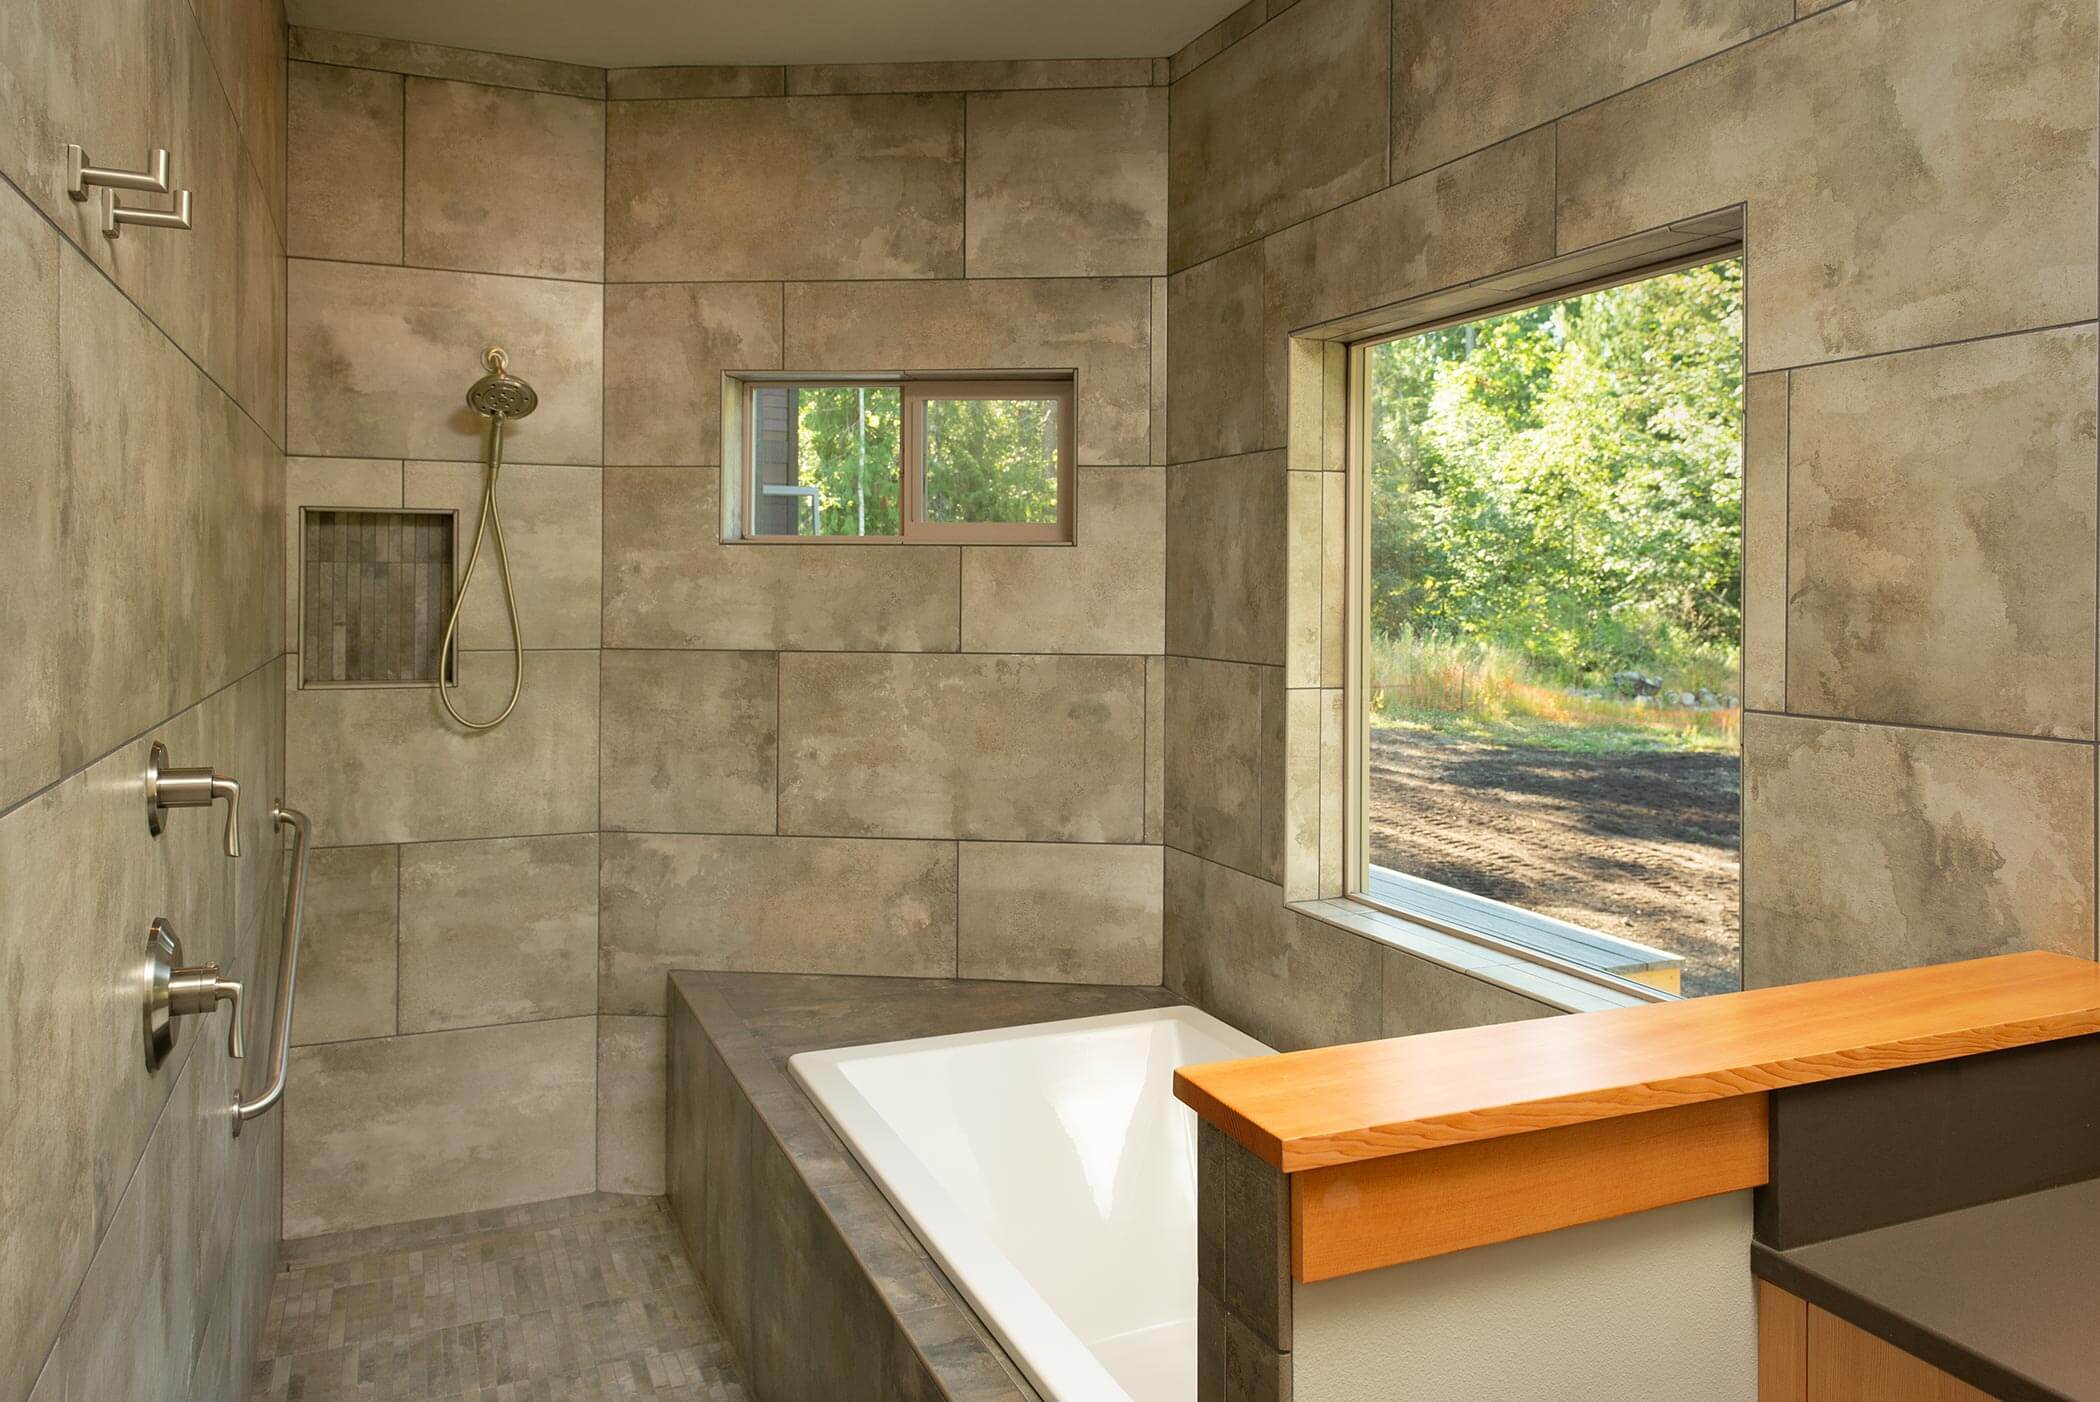 Master Bath - Porcelain Tile and Built-in Soaking Tub with Wood Accents